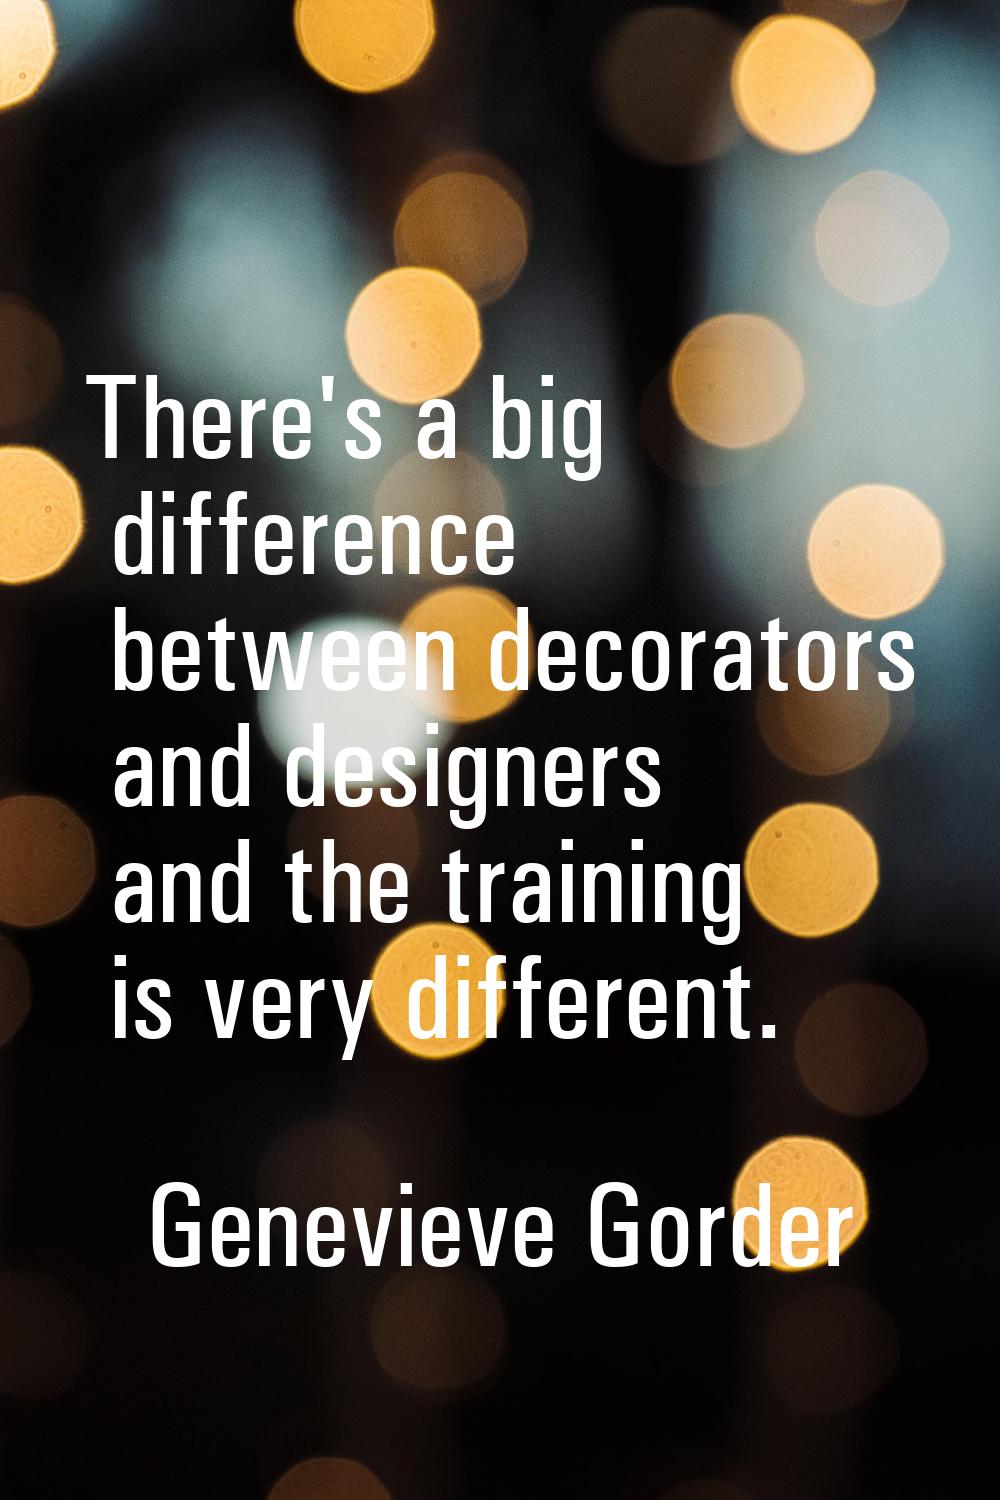 There's a big difference between decorators and designers and the training is very different.